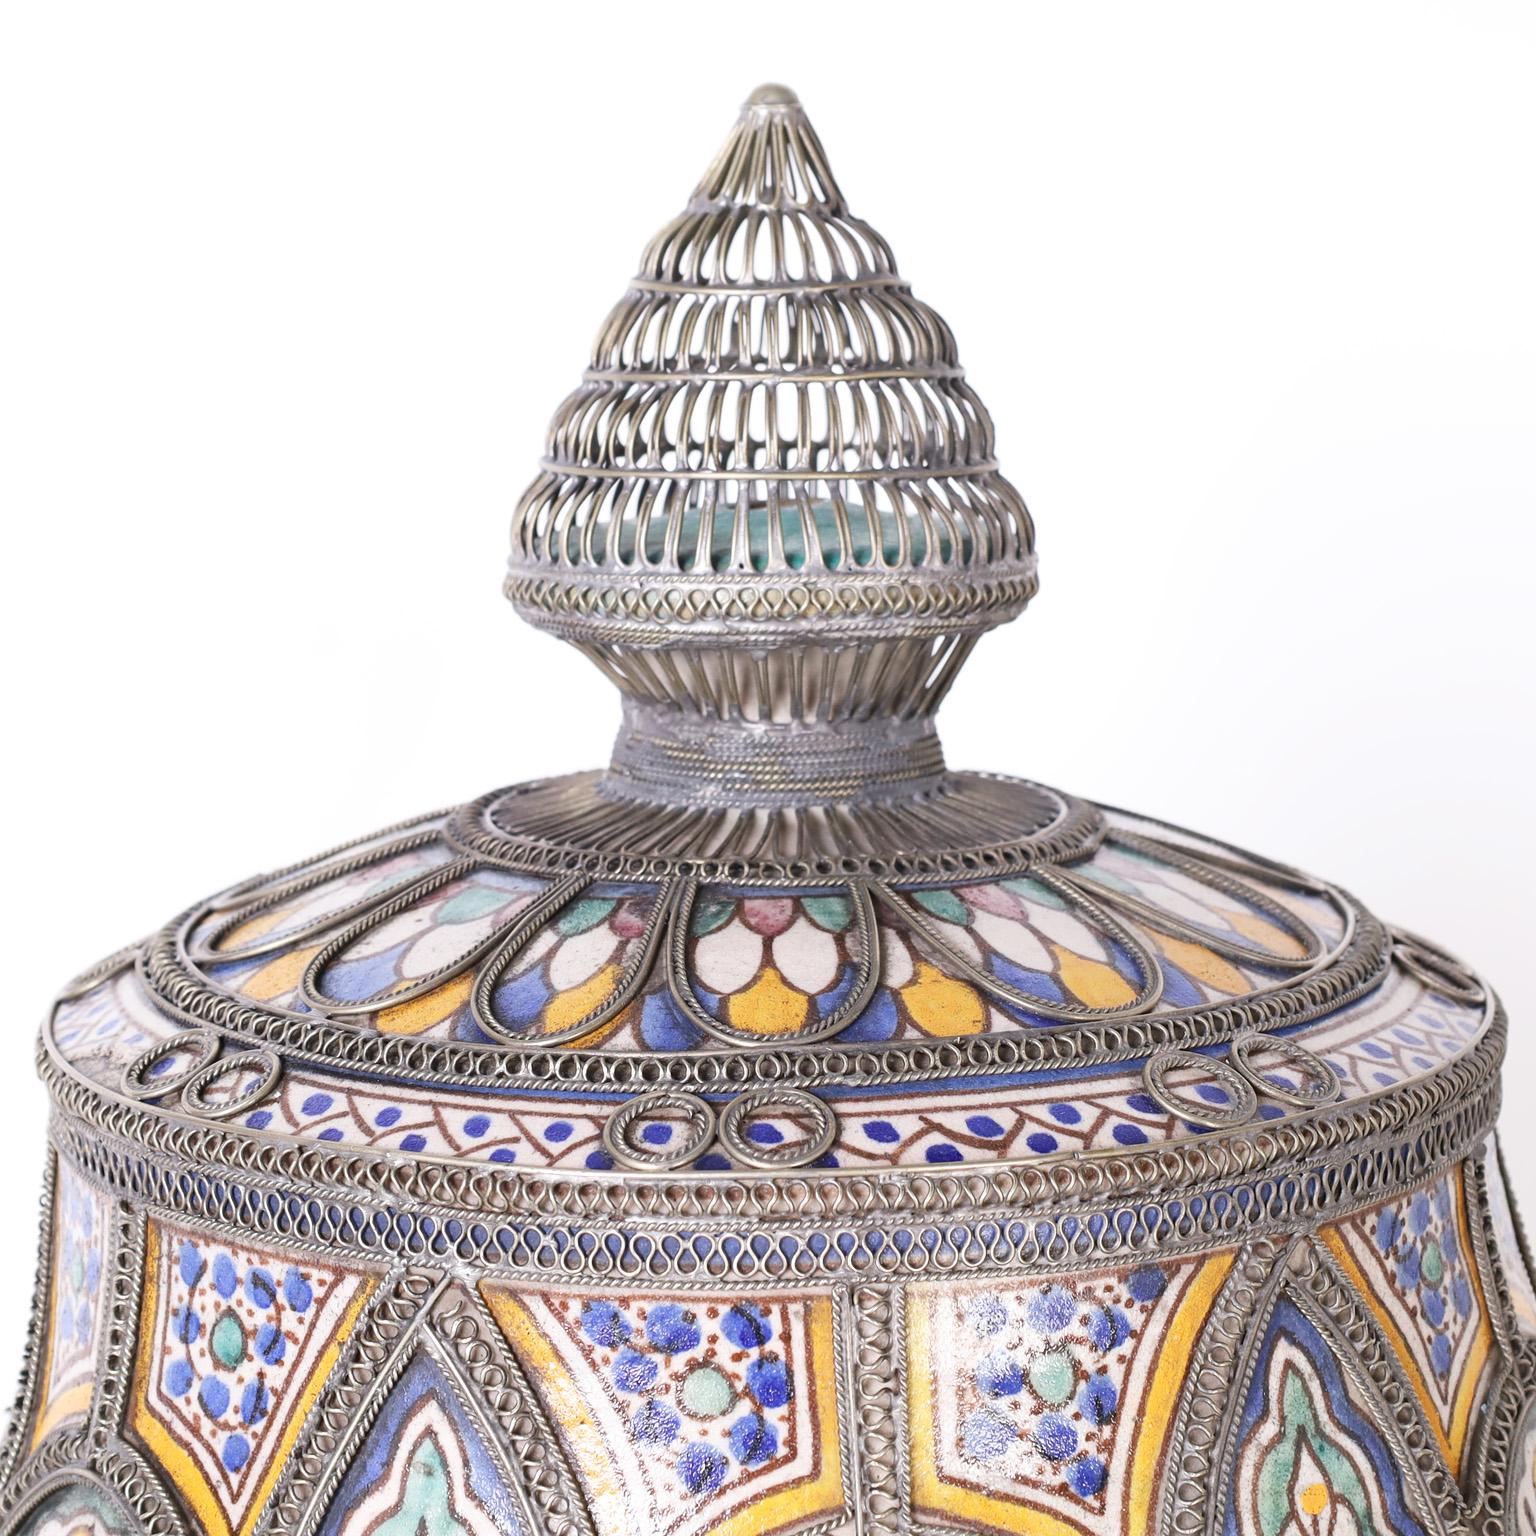 Large glazed terra cotta urn decorated with floral and geometric designs in traditional mediterranean colors and applied jewelry style metalwork taking this urn to the next level.